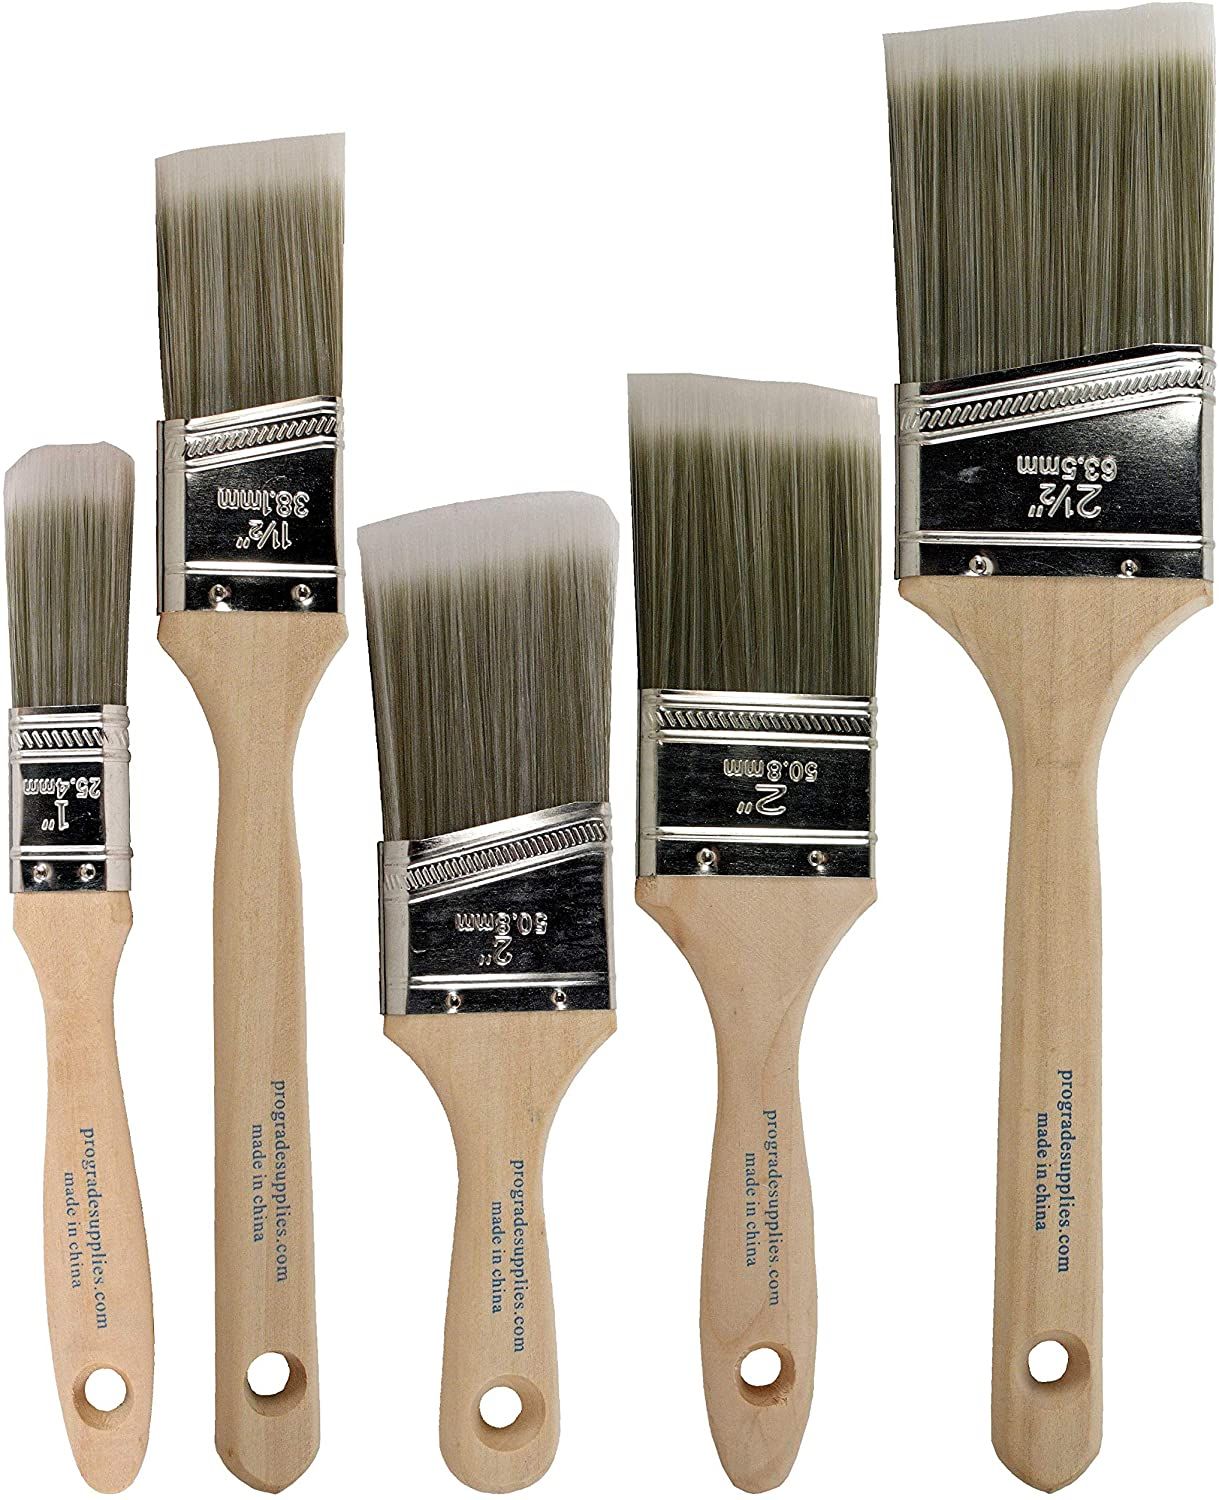 10 Best Paintbrushes for Trim: What to Look for Before You DIY